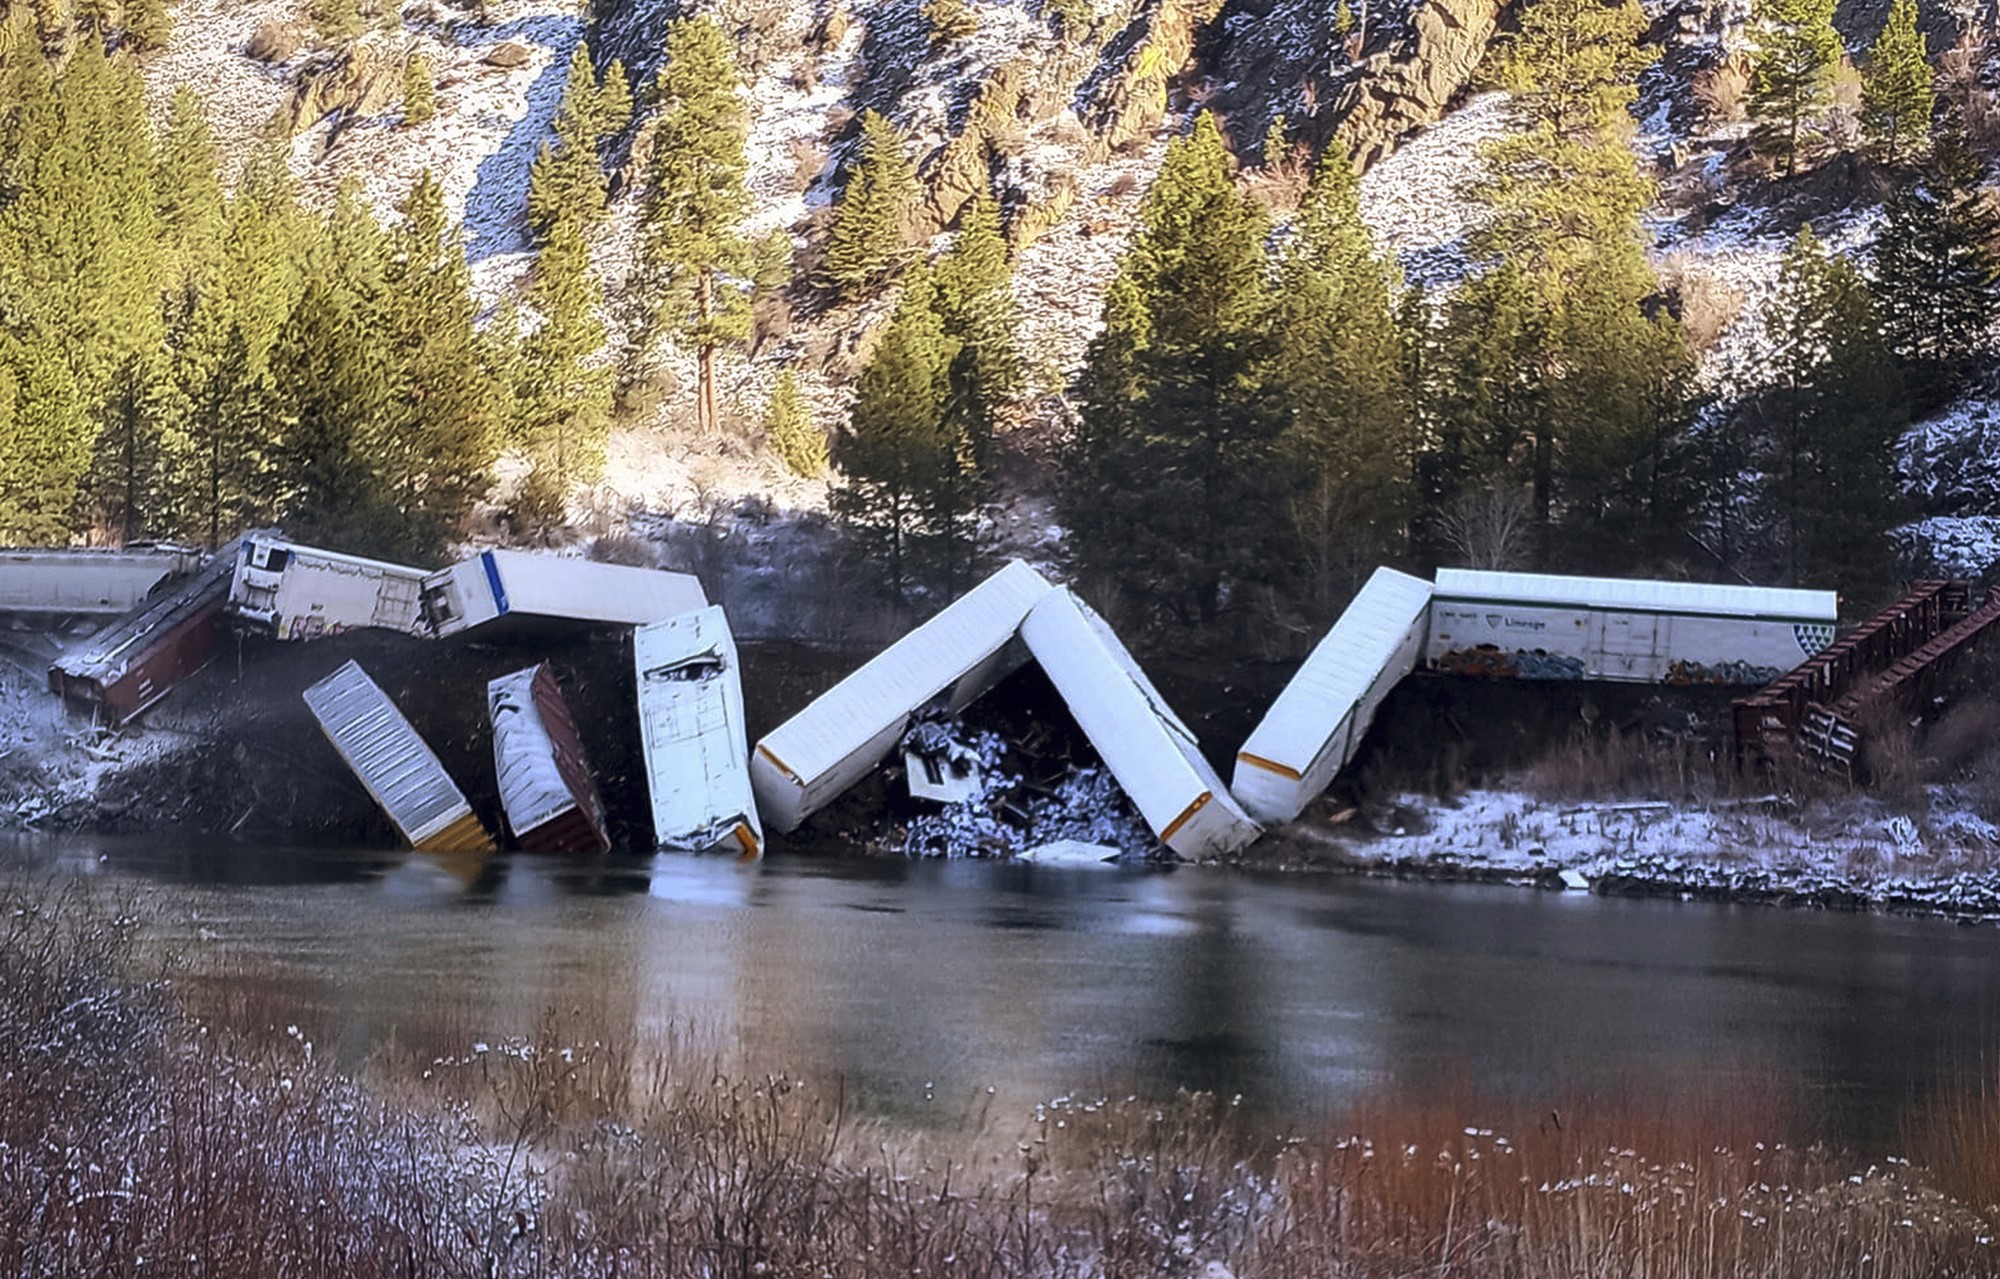 A photo of train cars which have fallen from a track and into water below. Snow and trees on a steep hill in the background